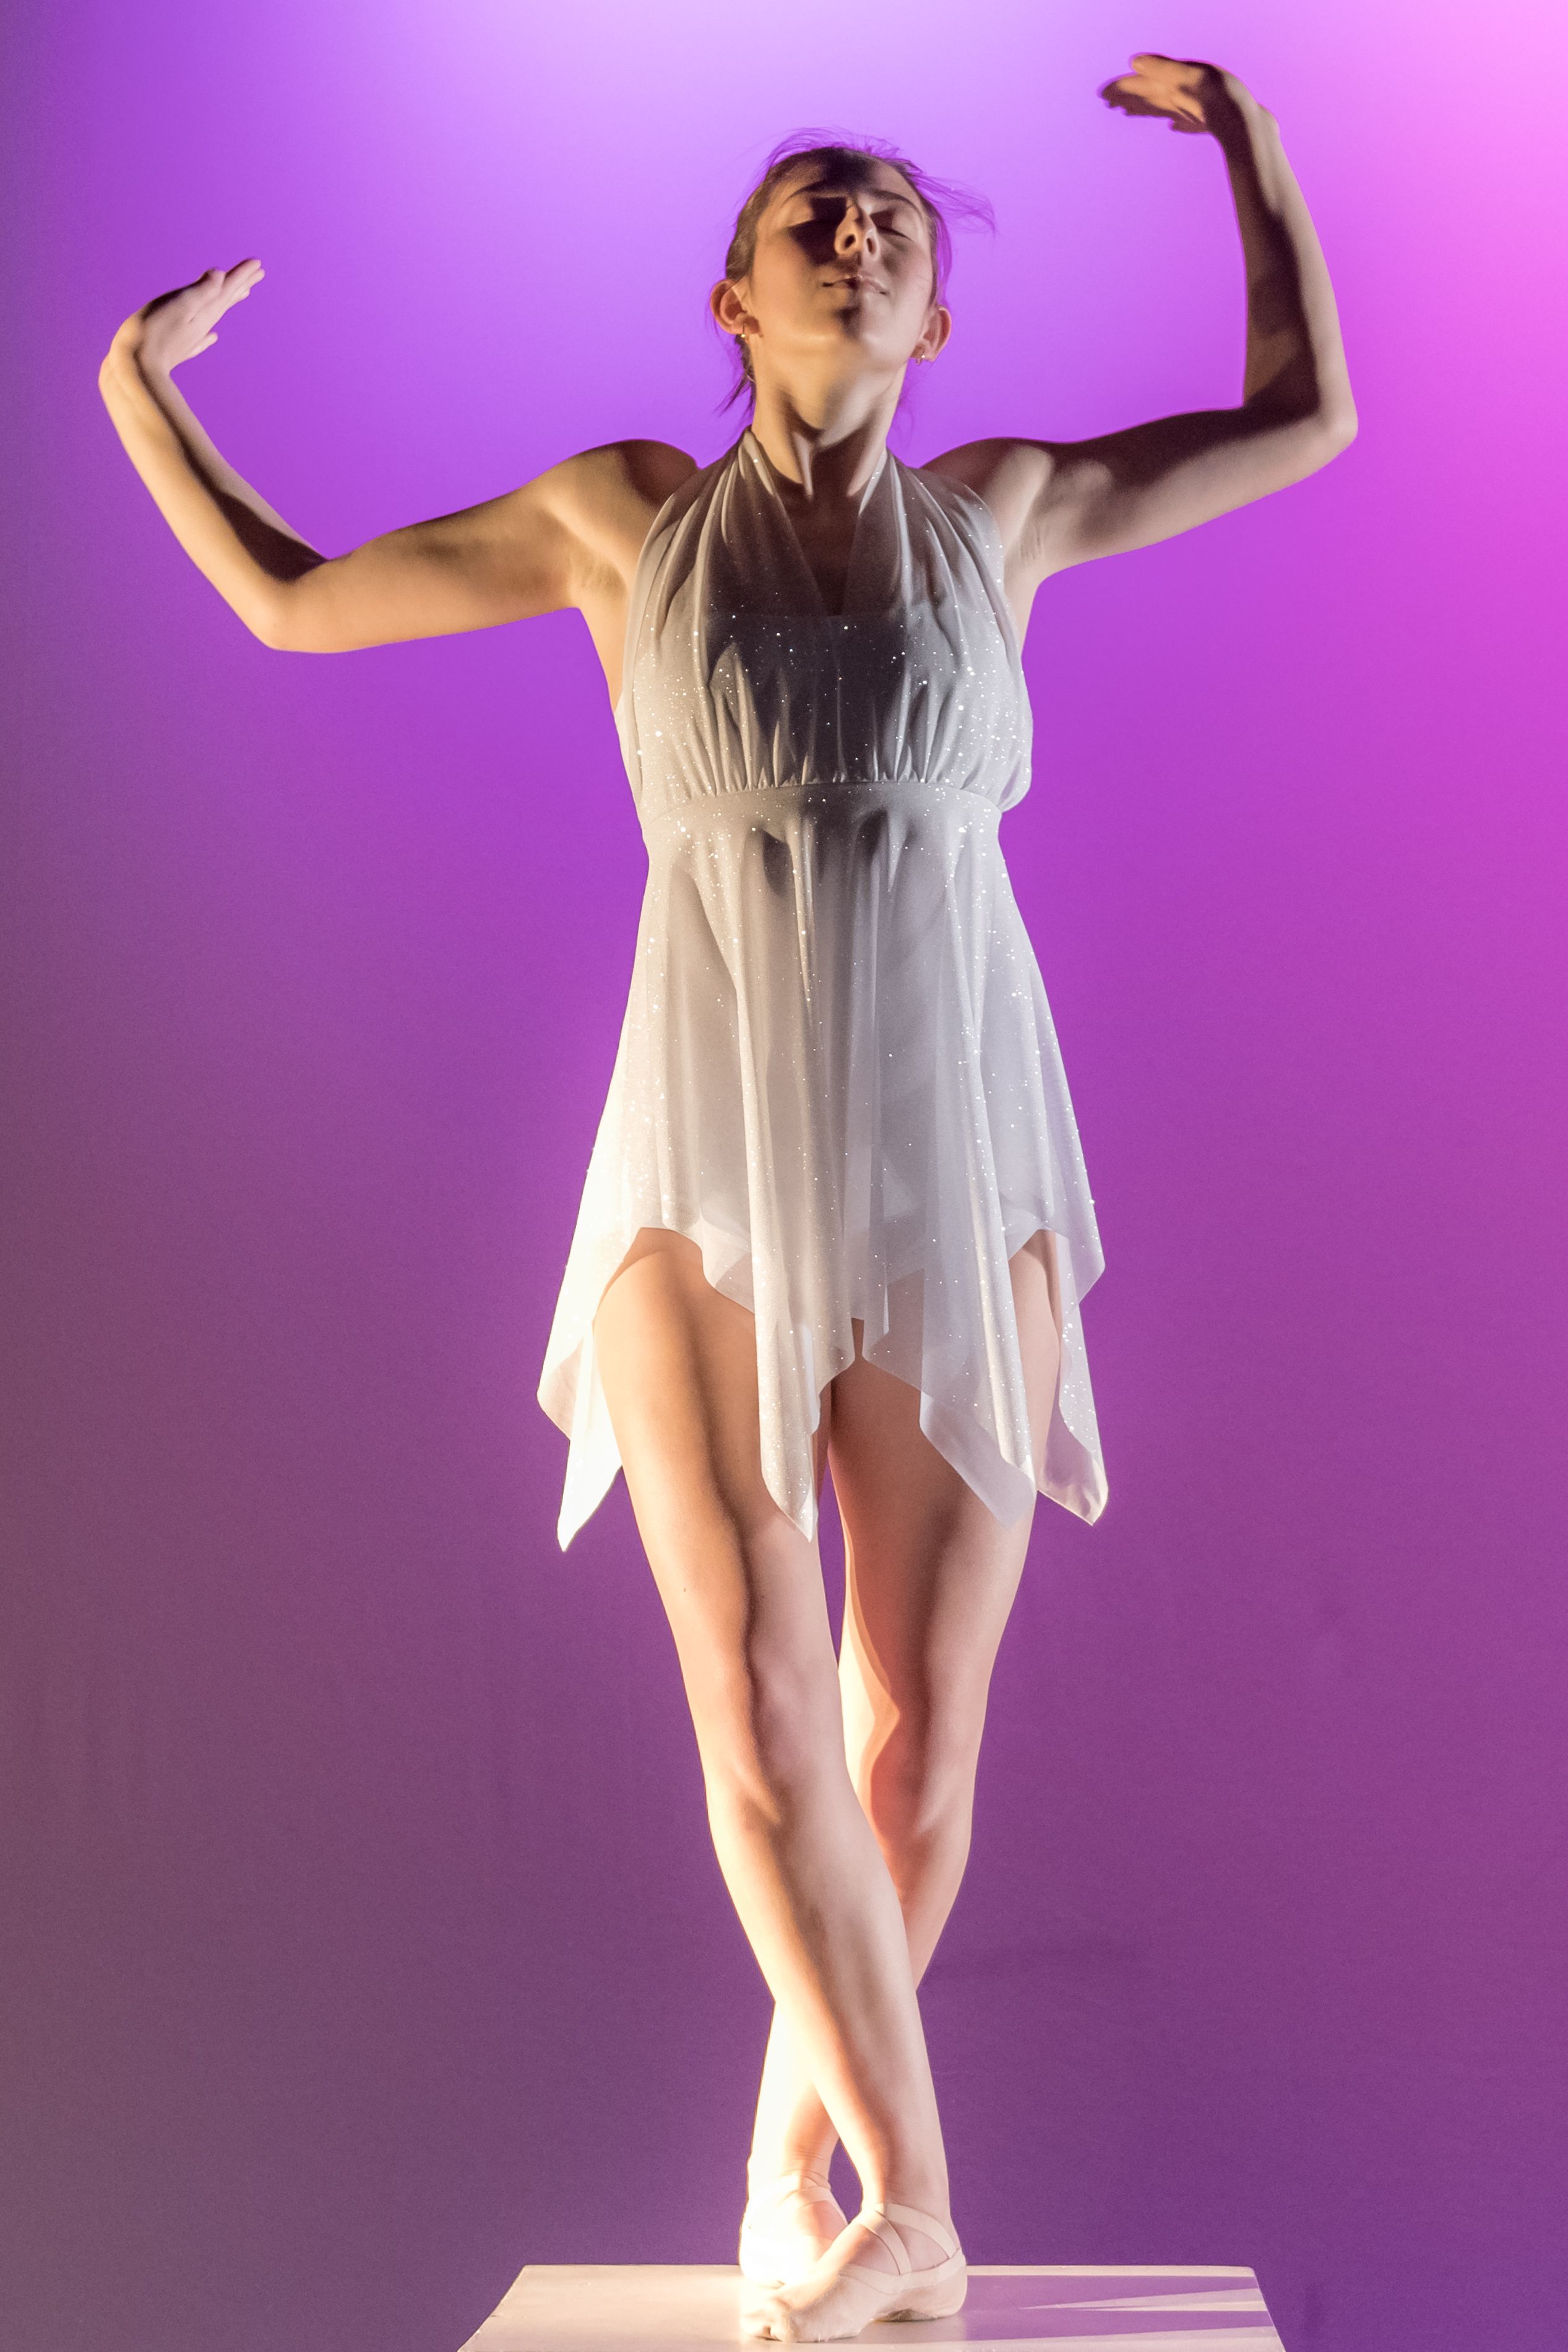 Female dancer with arms up and eyes closed on pedestal wearing white outfit on purple background